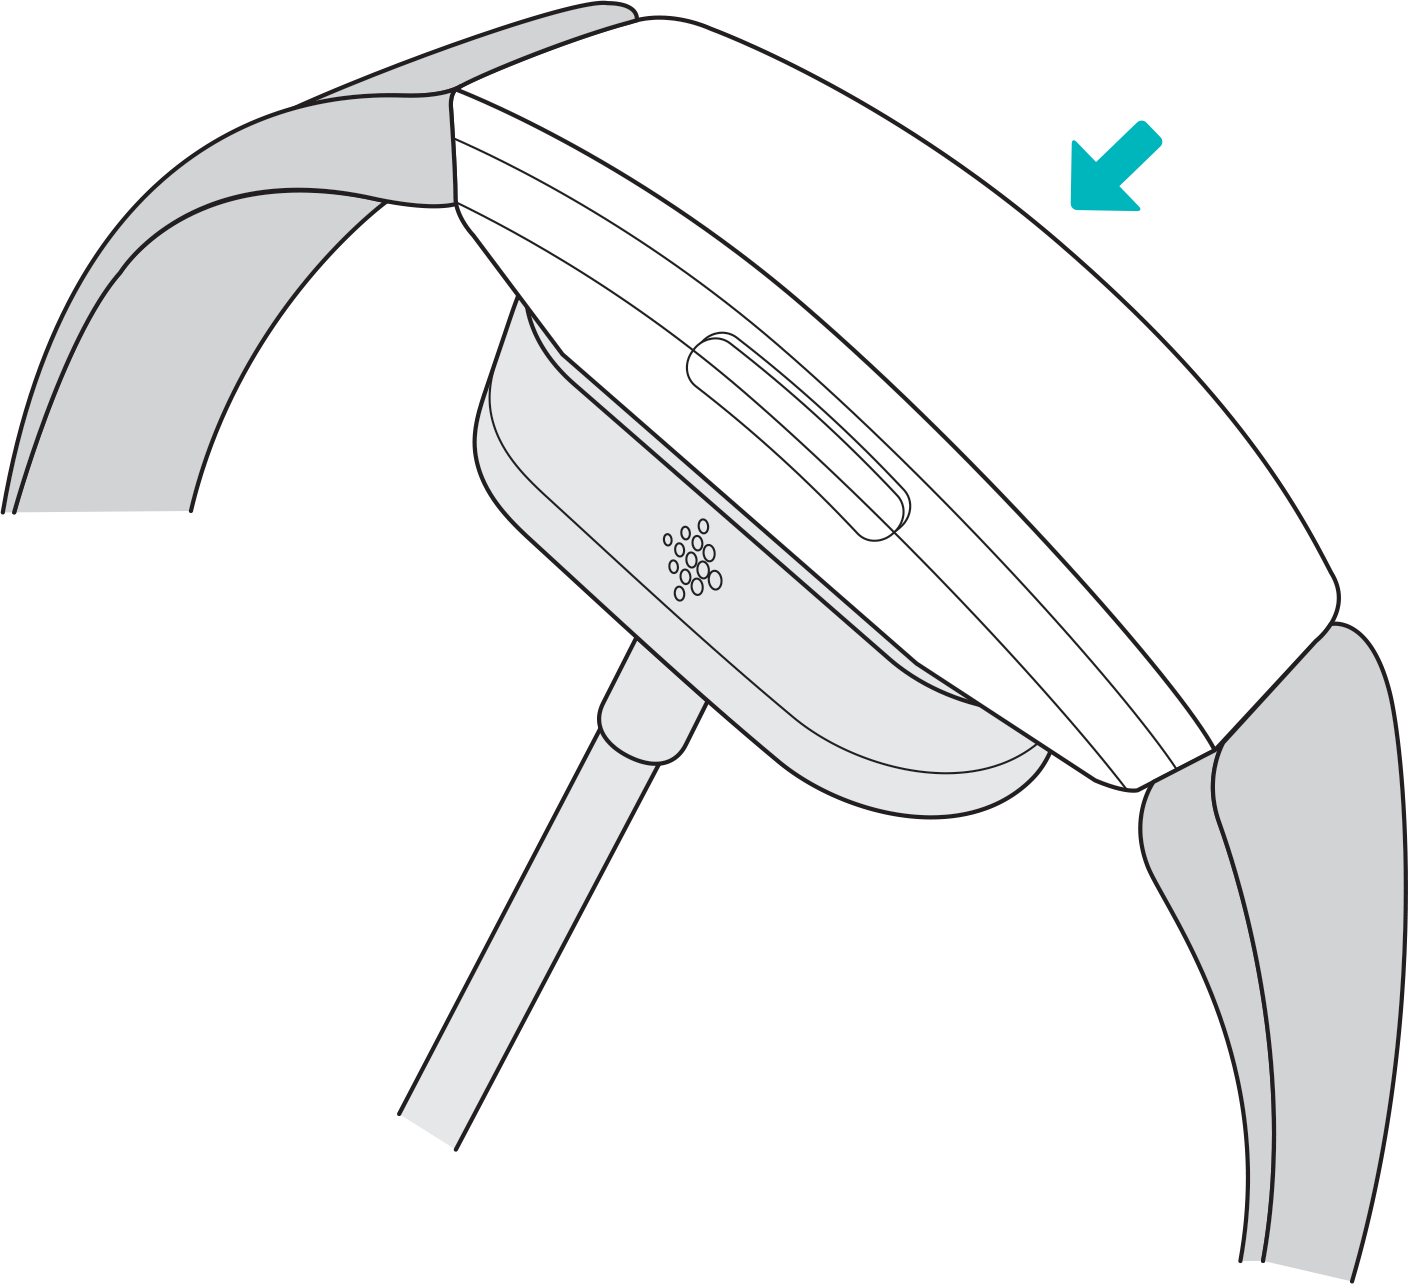 Tracker with the charging cable attached to the underside